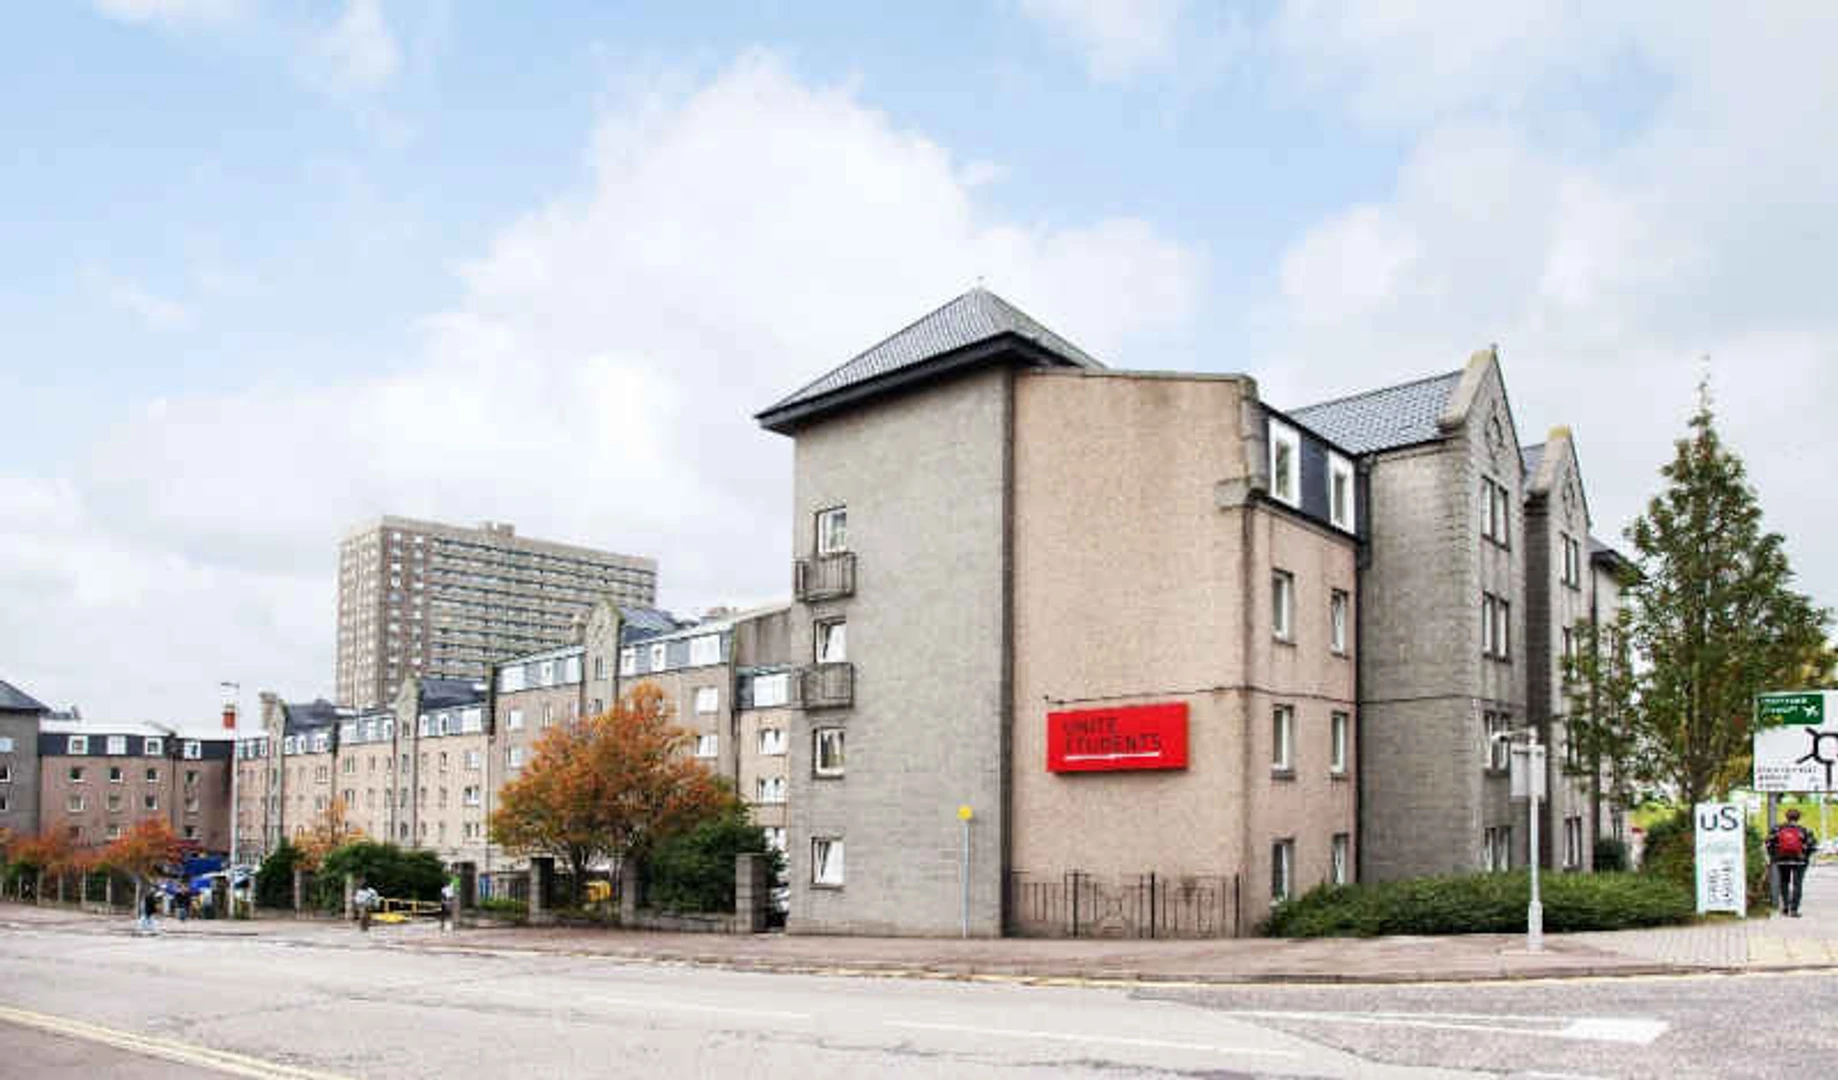 Accommodation in the centre of Aberdeen